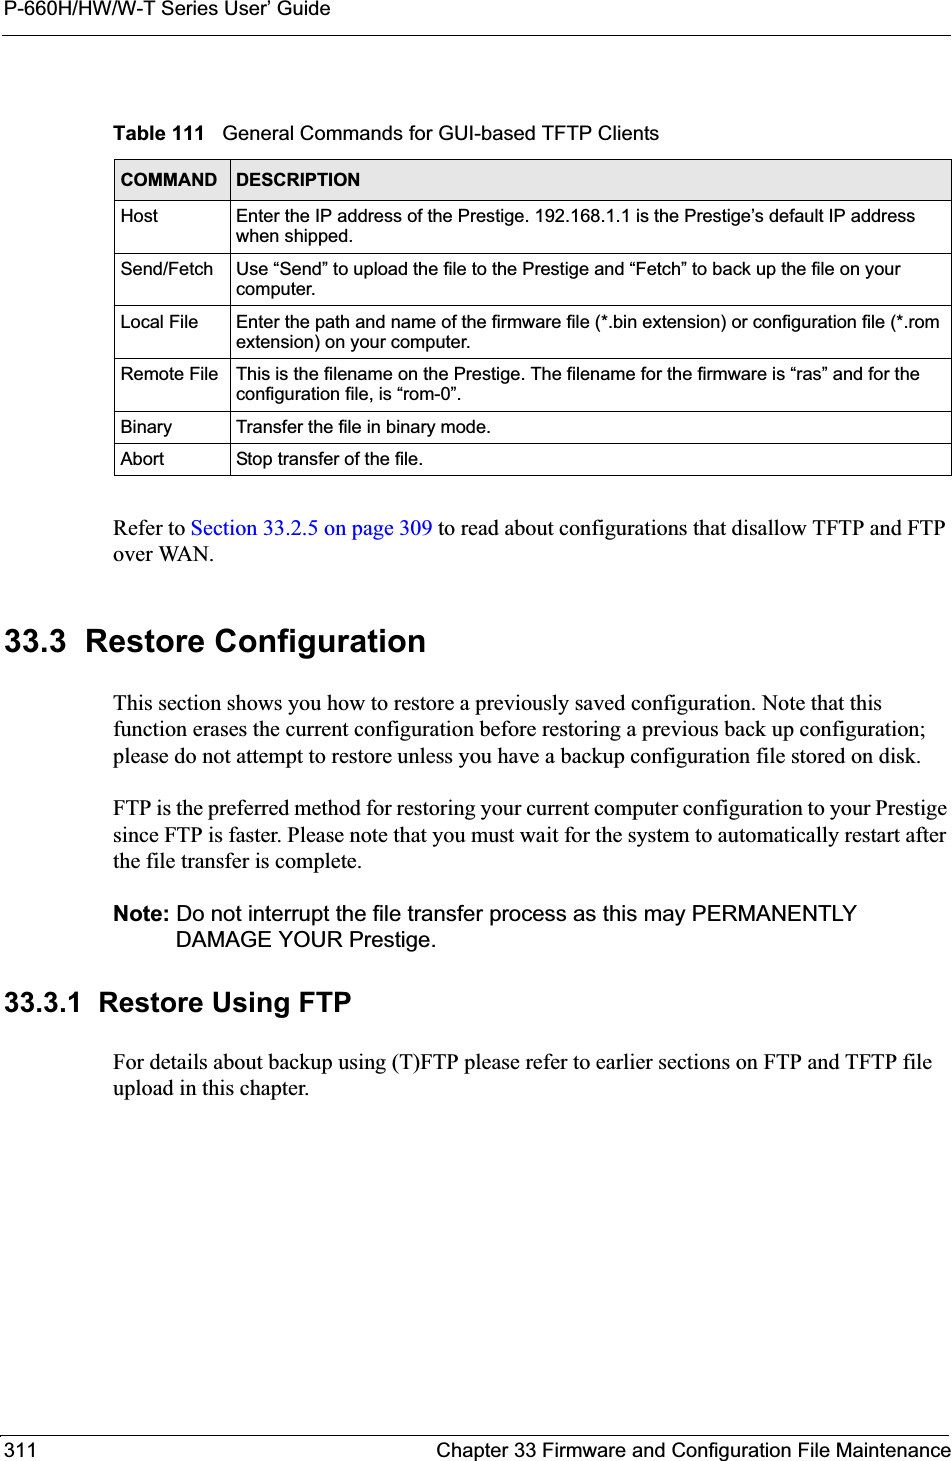 P-660H/HW/W-T Series User’ Guide311 Chapter 33 Firmware and Configuration File MaintenanceRefer to Section 33.2.5 on page 309 to read about configurations that disallow TFTP and FTP over WAN.33.3  Restore ConfigurationThis section shows you how to restore a previously saved configuration. Note that this function erases the current configuration before restoring a previous back up configuration; please do not attempt to restore unless you have a backup configuration file stored on disk. FTP is the preferred method for restoring your current computer configuration to your Prestige since FTP is faster. Please note that you must wait for the system to automatically restart after the file transfer is complete.Note: Do not interrupt the file transfer process as this may PERMANENTLY DAMAGE YOUR Prestige. 33.3.1  Restore Using FTPFor details about backup using (T)FTP please refer to earlier sections on FTP and TFTP file upload in this chapter.Table 111   General Commands for GUI-based TFTP ClientsCOMMAND DESCRIPTIONHost Enter the IP address of the Prestige. 192.168.1.1 is the Prestige’s default IP address when shipped.Send/Fetch Use “Send” to upload the file to the Prestige and “Fetch” to back up the file on your computer. Local File Enter the path and name of the firmware file (*.bin extension) or configuration file (*.rom extension) on your computer.Remote File This is the filename on the Prestige. The filename for the firmware is “ras” and for the configuration file, is “rom-0”.Binary Transfer the file in binary mode.Abort Stop transfer of the file.